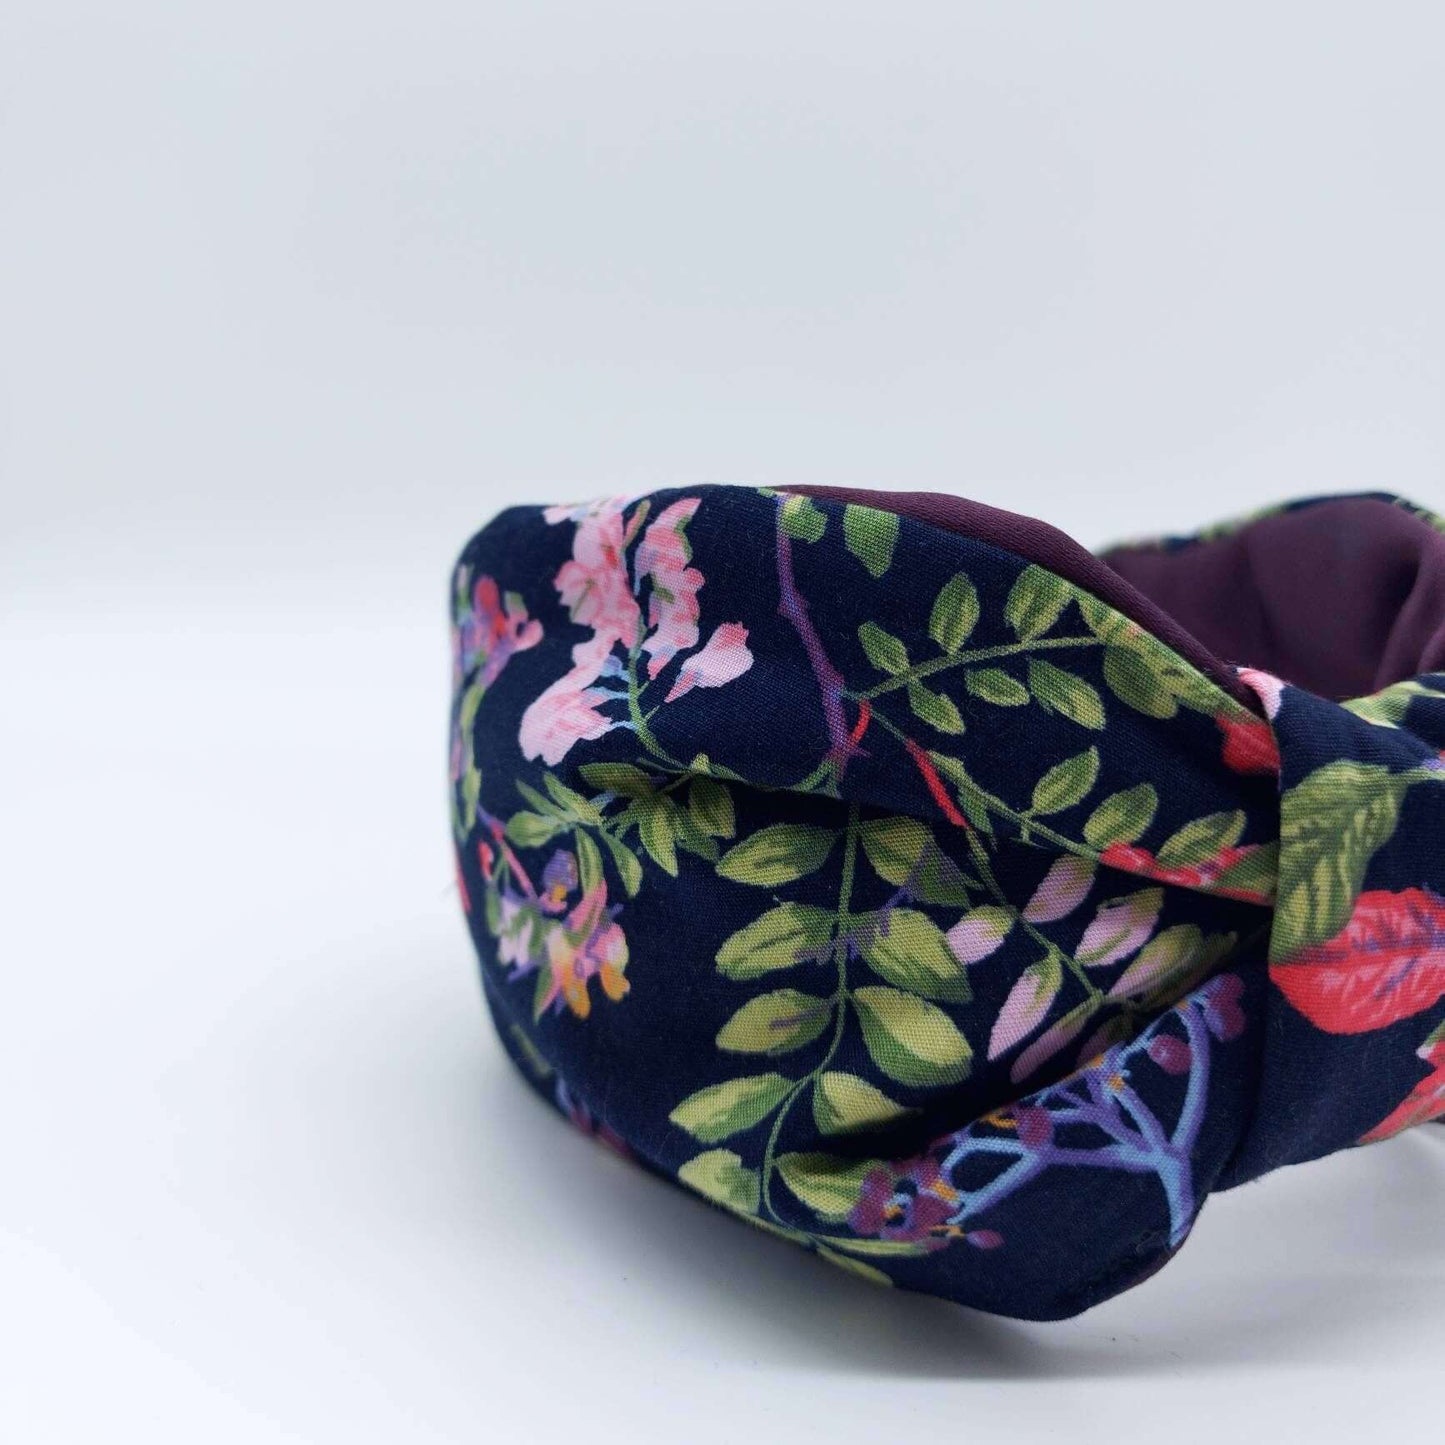 A bow-style, navy blue, red, purple and green floral fabric knot headband with purple satin lining underneath..